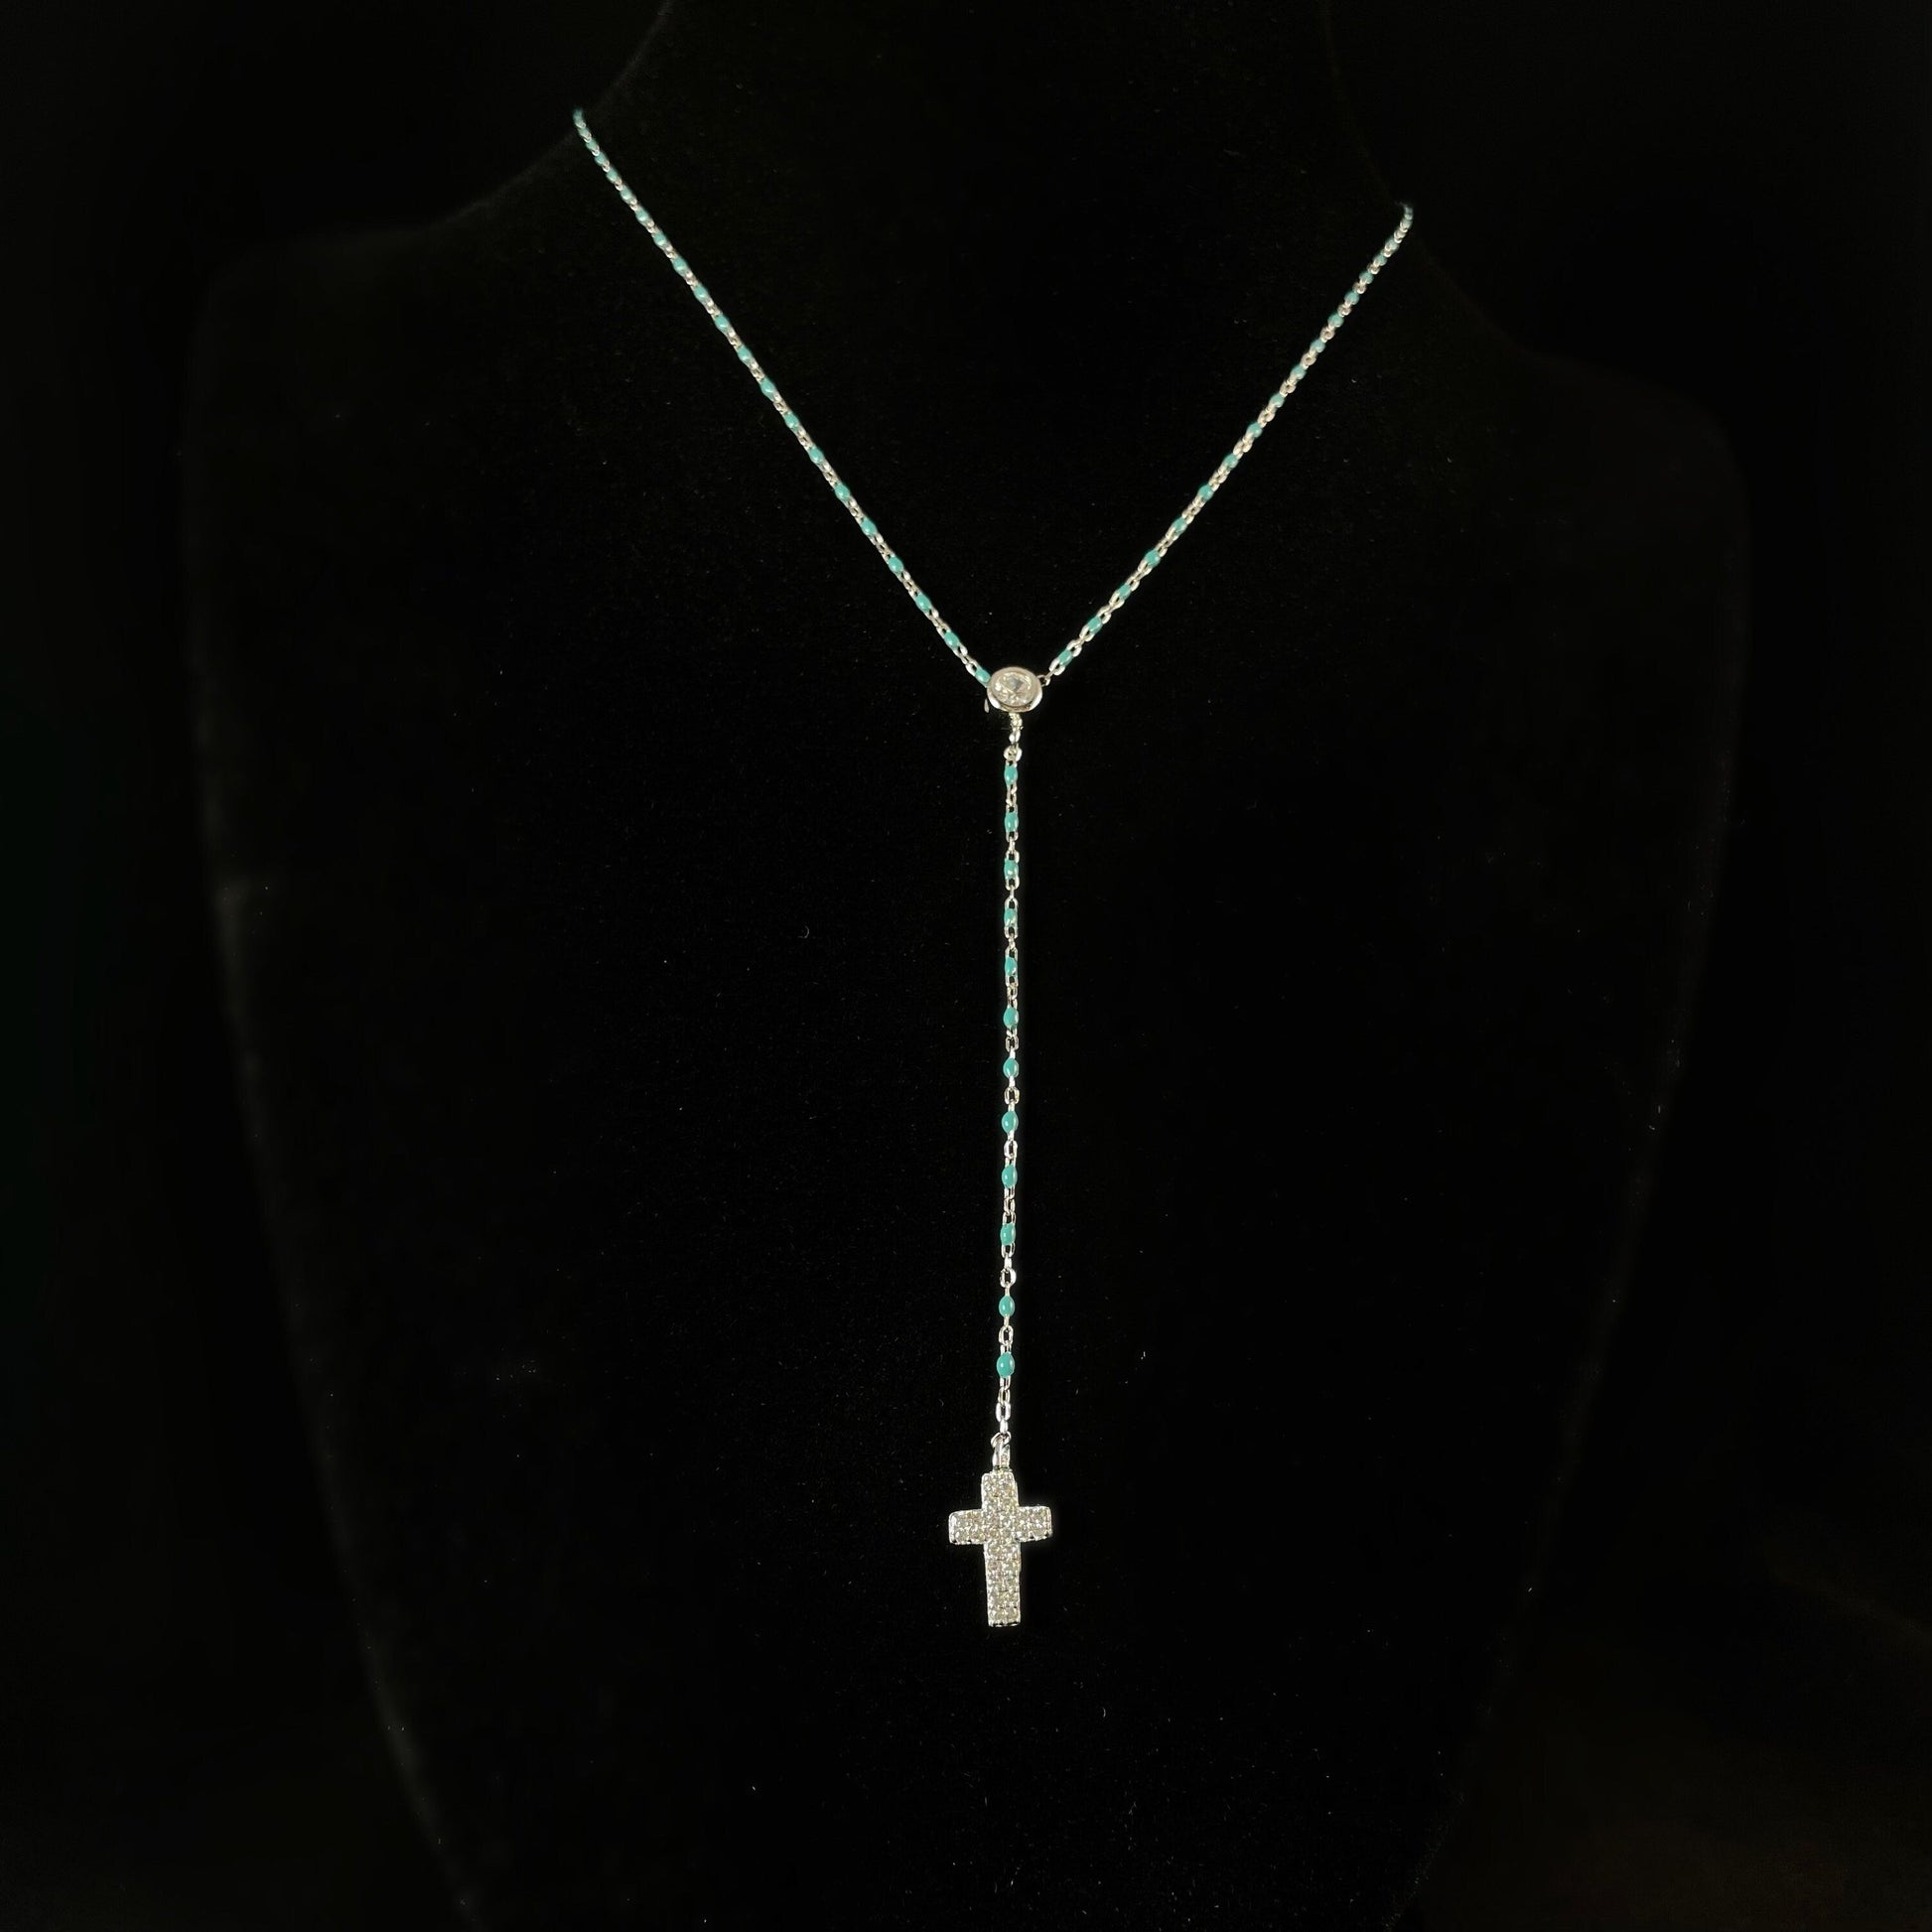 Silver Chain Necklace with Turquoise Beads and Crystal Cross - Handmade in Spain